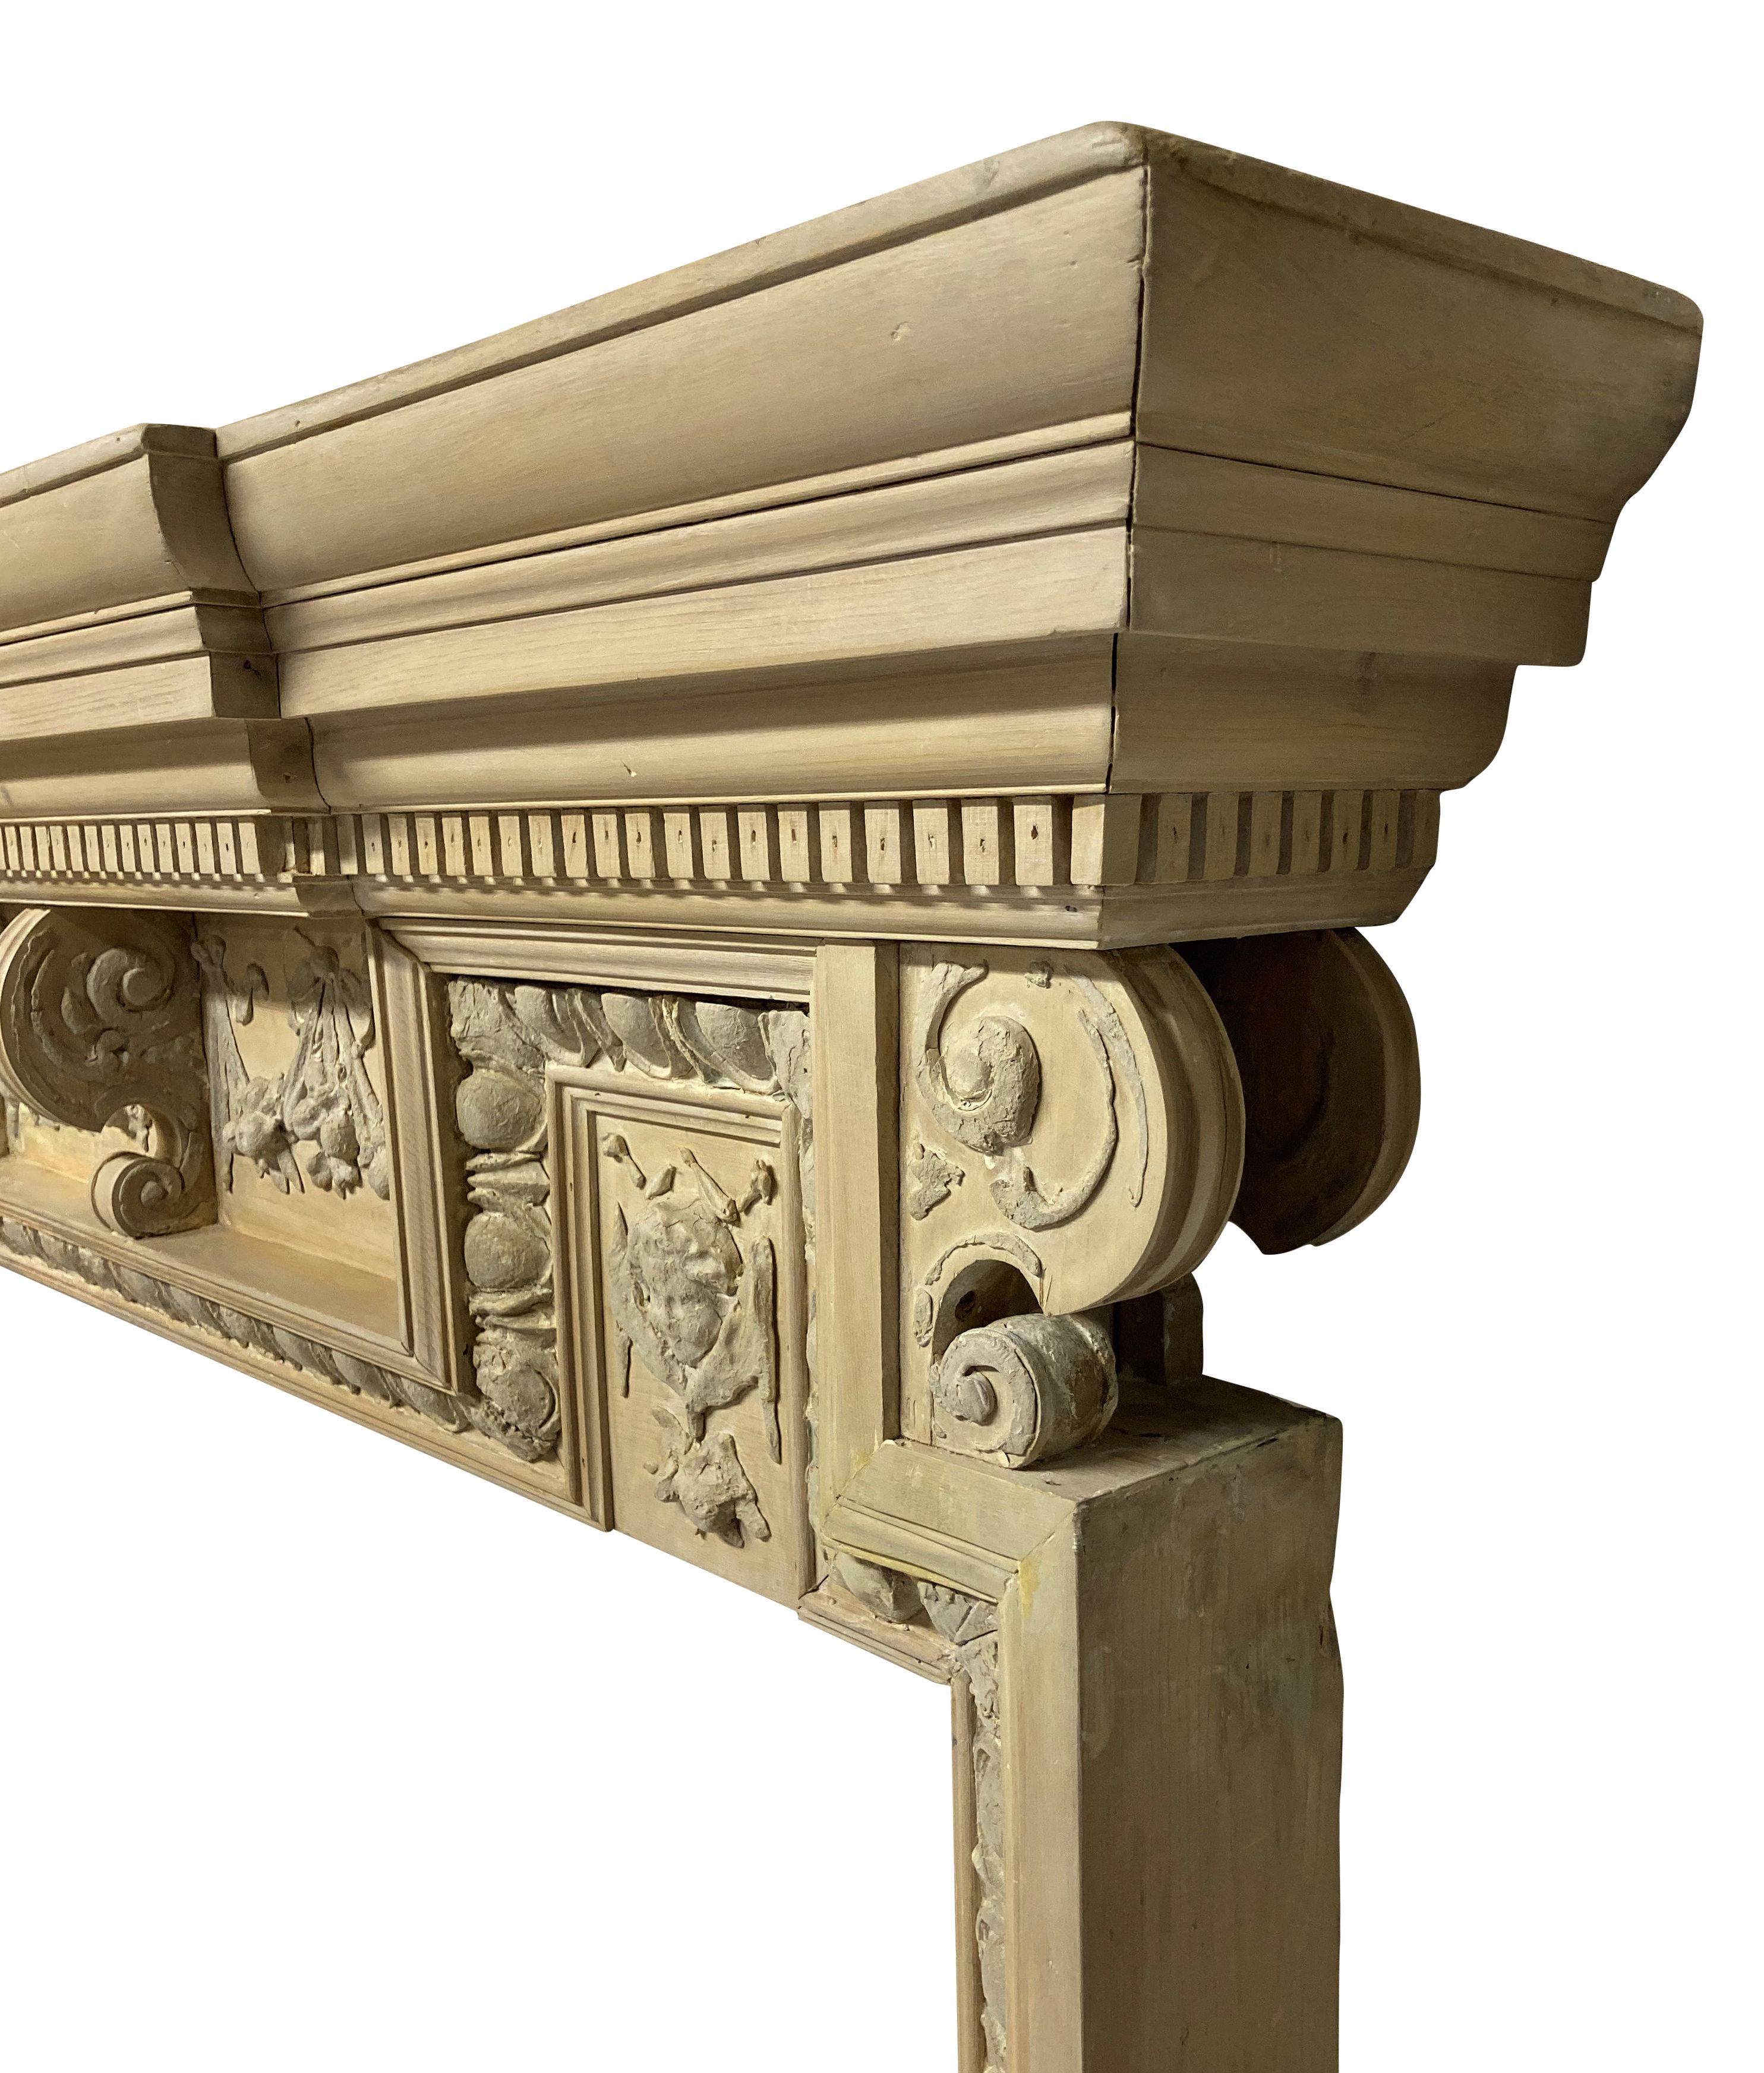 A pair of large English 18th century pickled pine and composition fire surrounds. With egg and dart moulding, swags, scrolls and cherubs. Probably pickled in the 1930s, when it was fashionable. Illustrated is one of two dozen 18th century cut iron